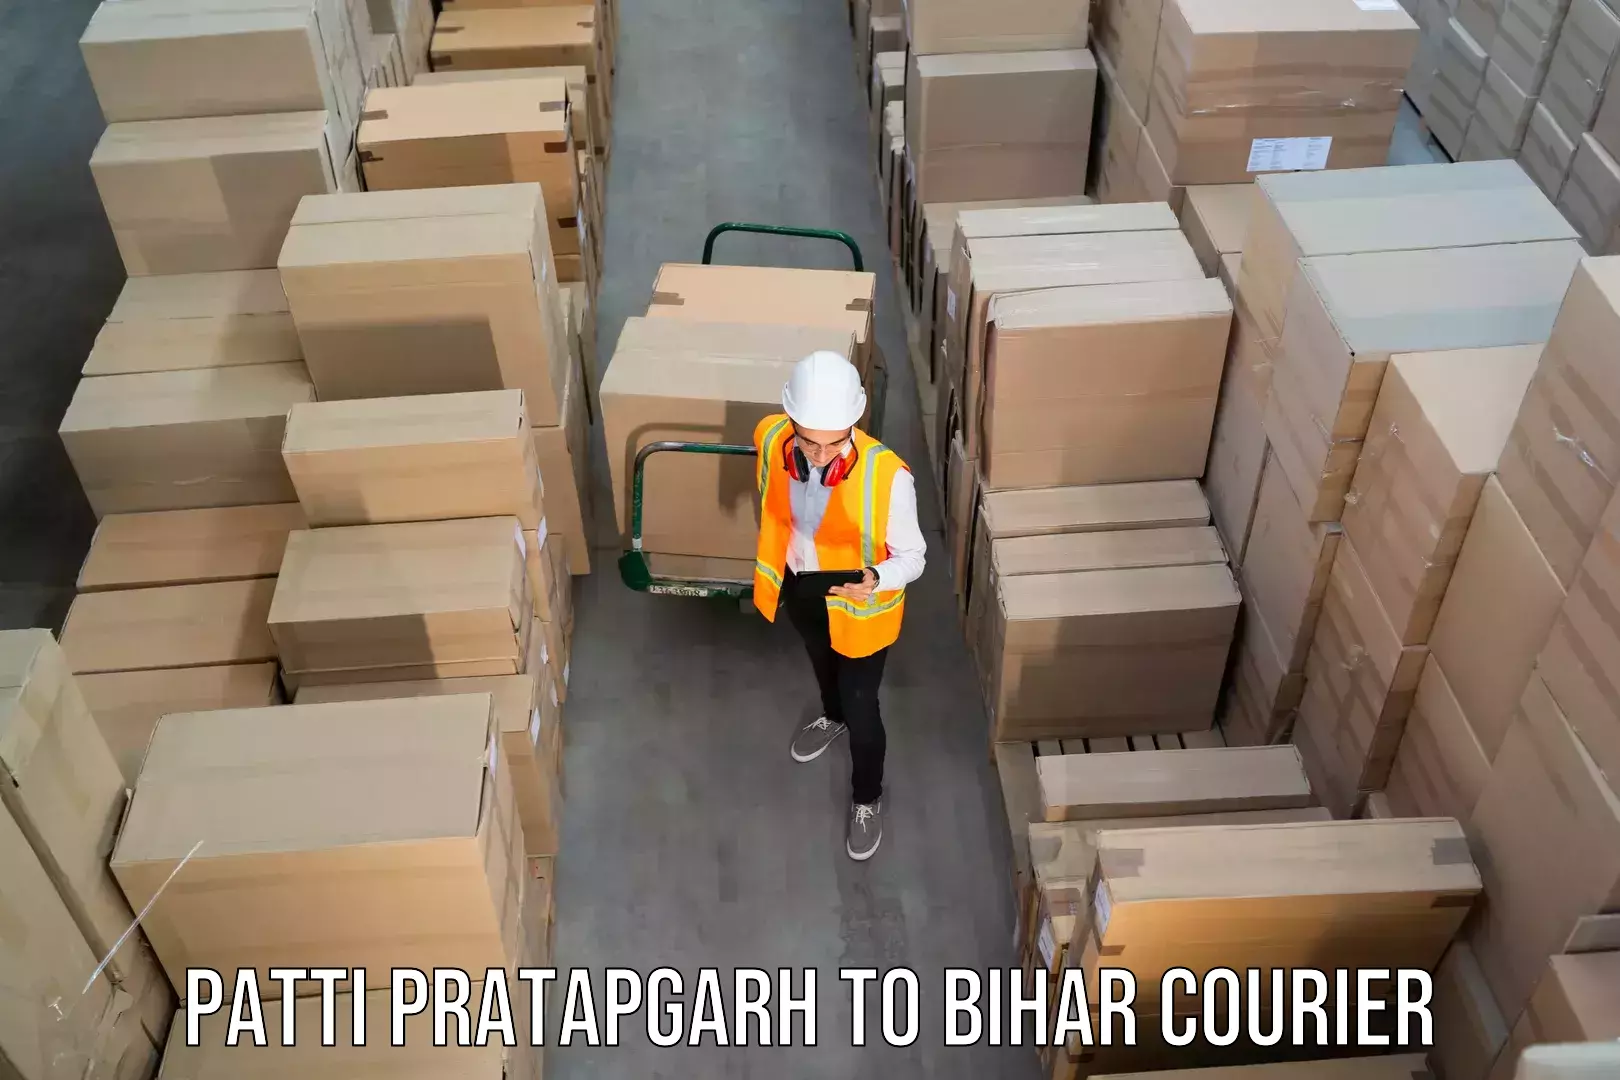 State-of-the-art courier technology in Patti Pratapgarh to Buxar